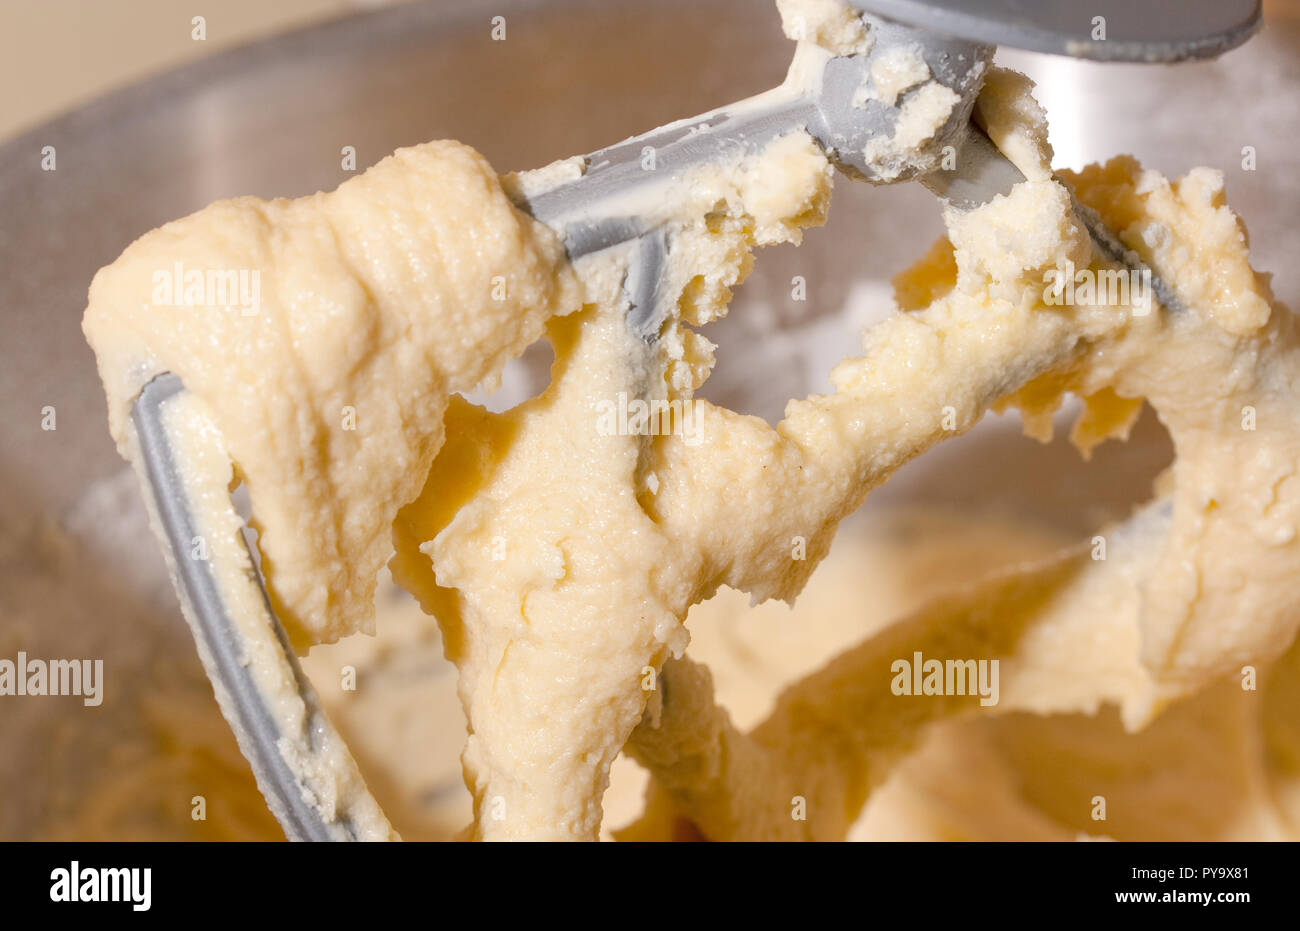 Mixing flour, butter and sugar into a batter for cakes Stock Photo